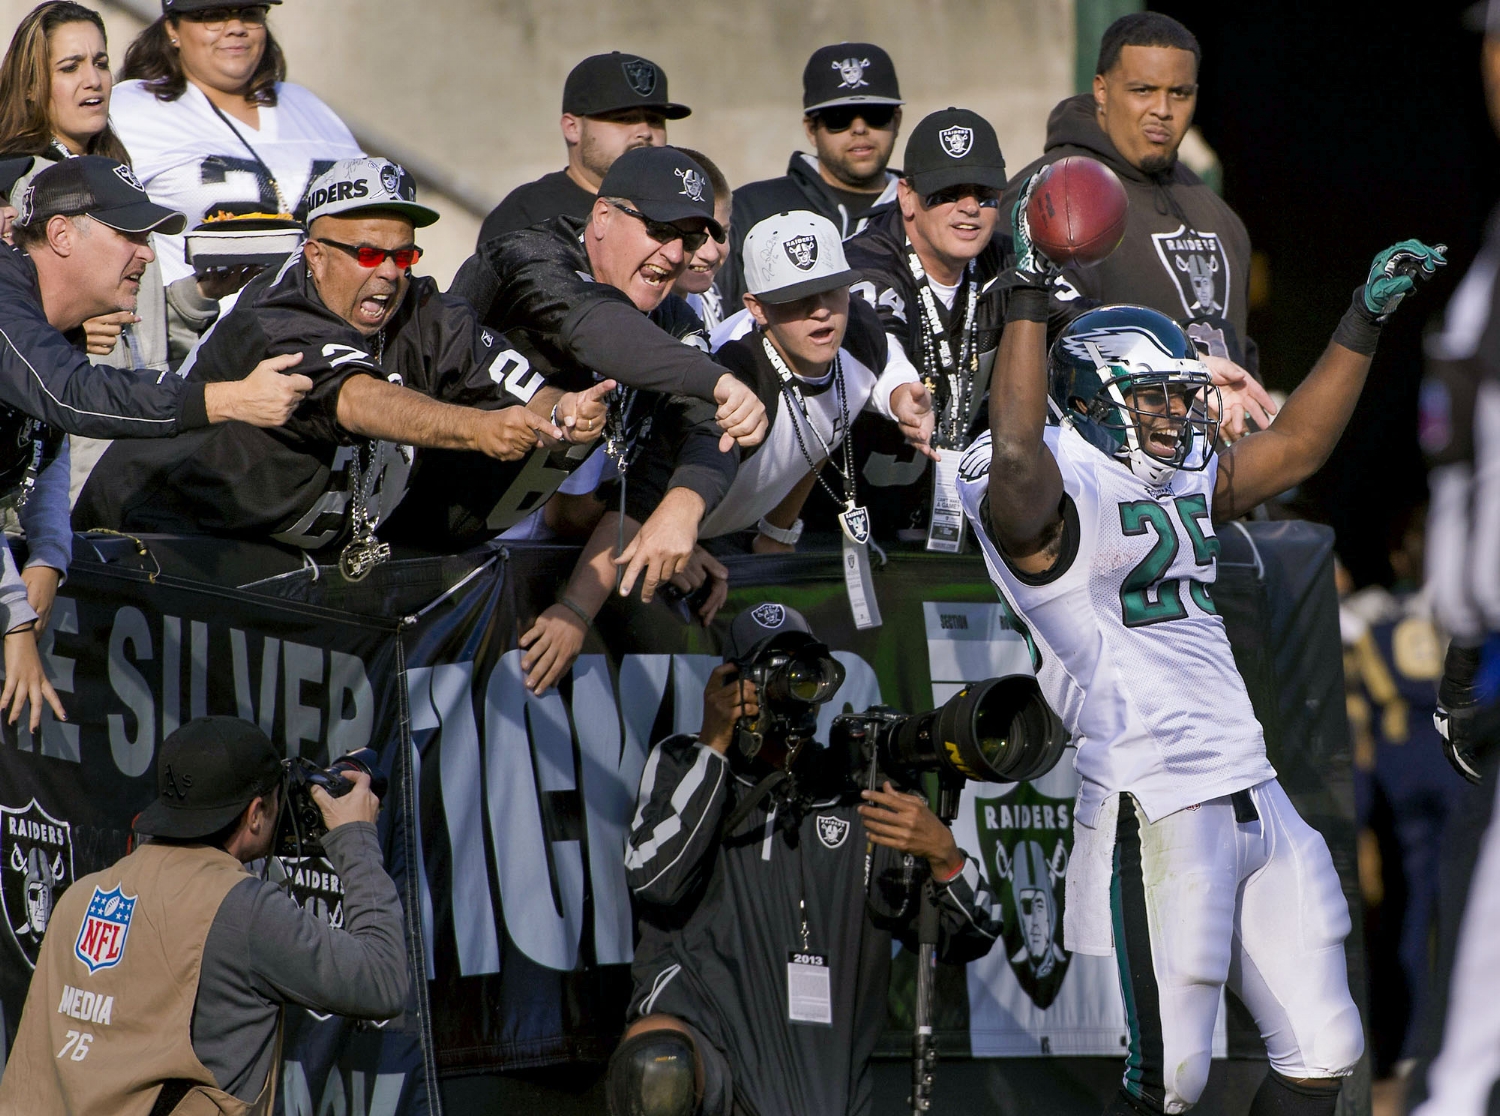  Raiders fans jeer as Eagles running back LeSean McCoy (25) celebrates a touchdown during the game between the Oakland Raiders and the Philadelphia Eagles at O.co Coliseum in Oakland on Sunday, November 3, 2013. 